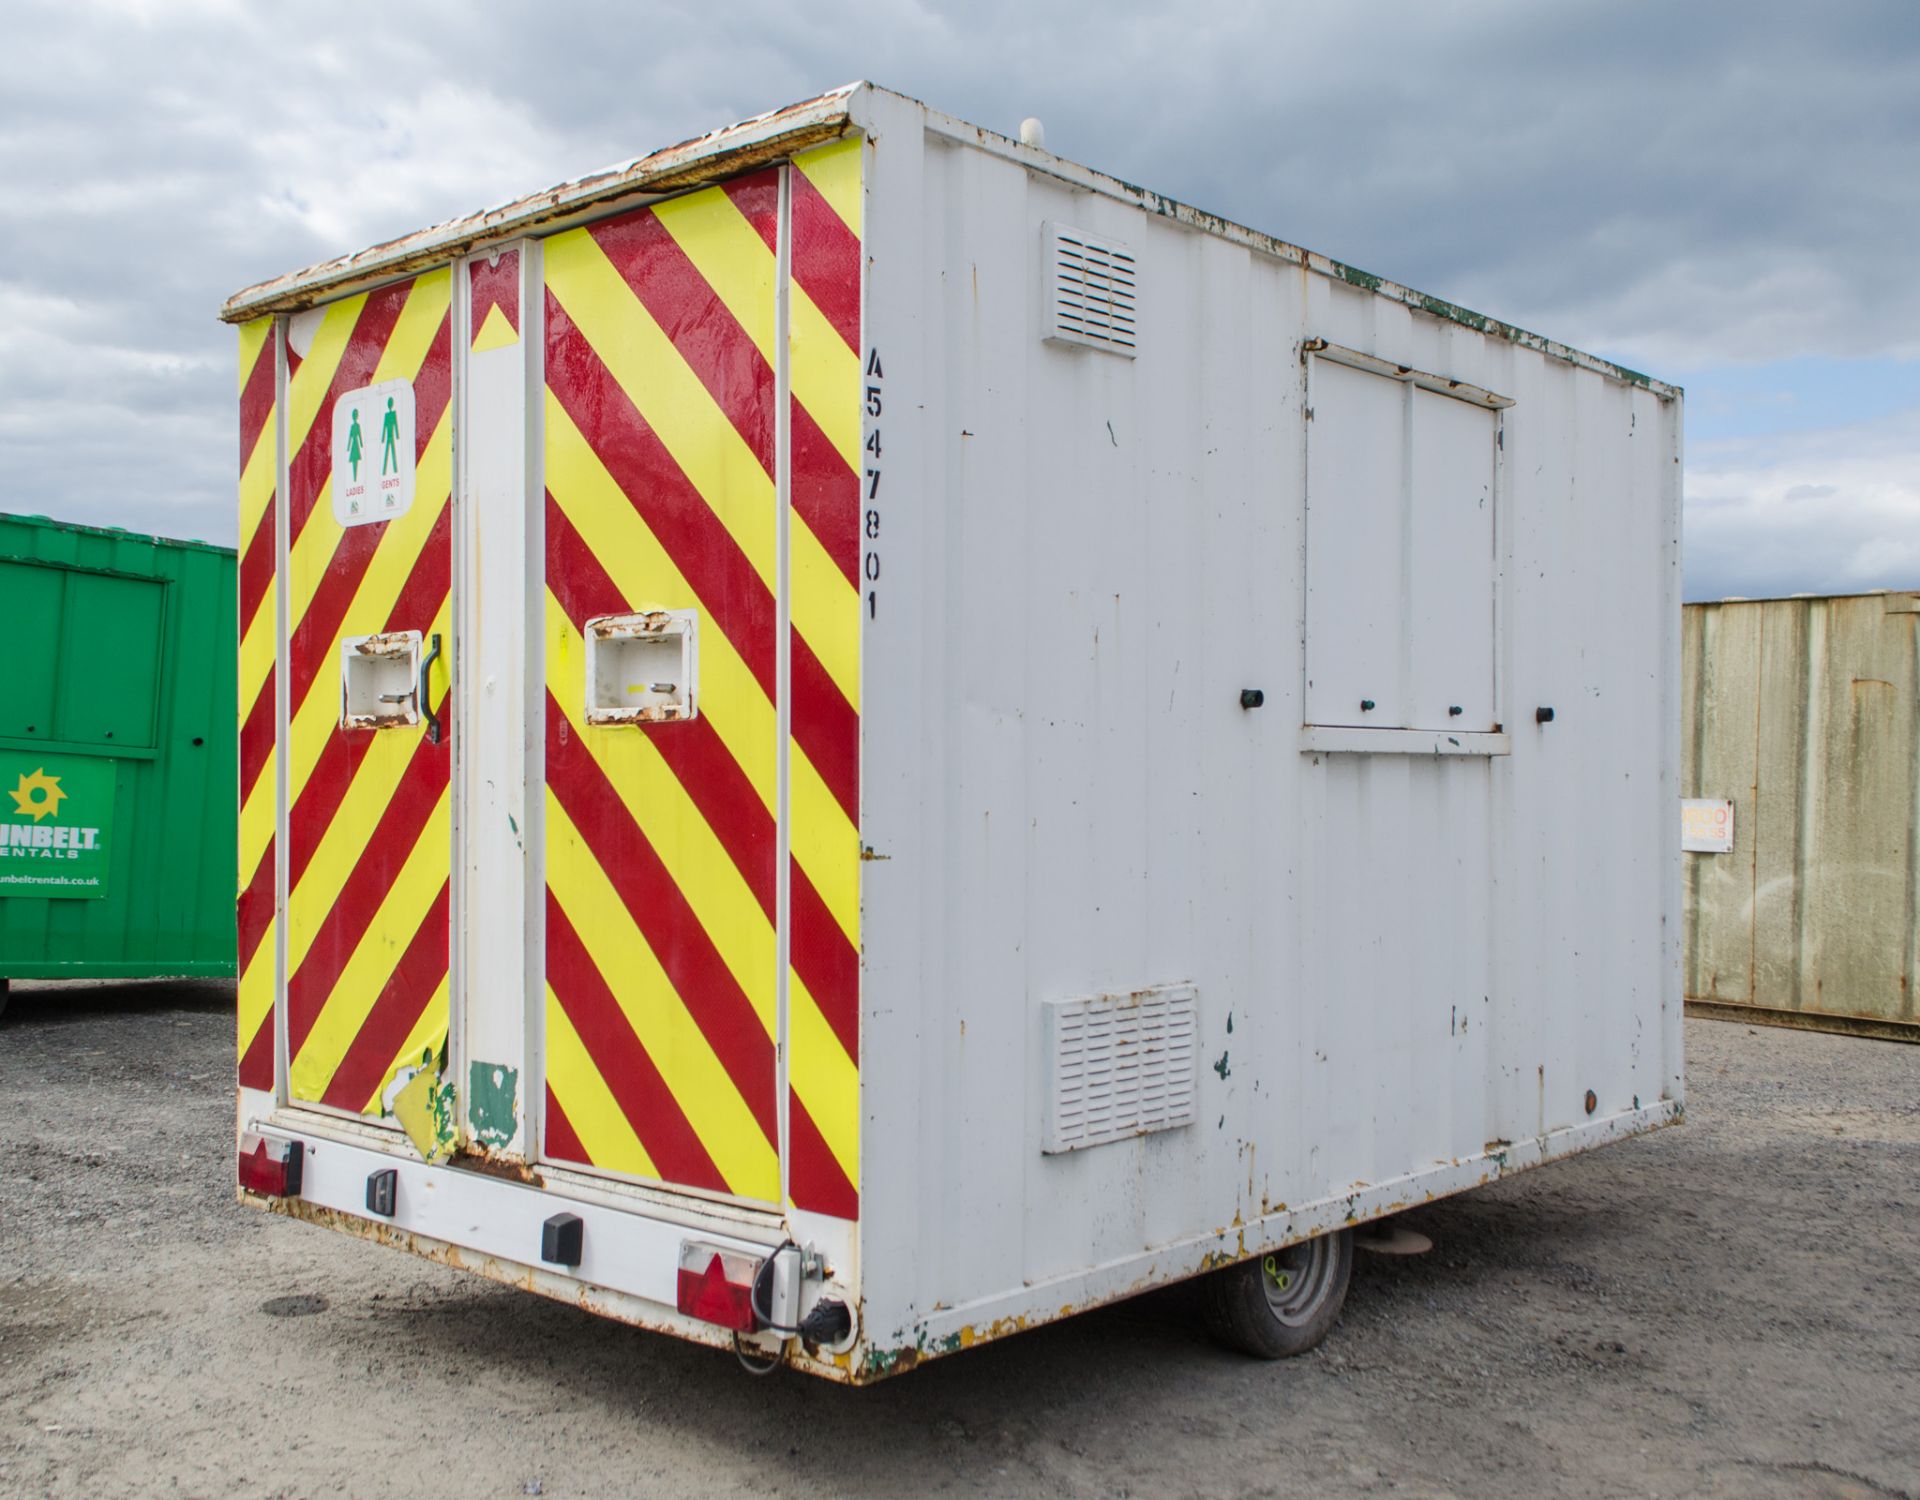 Groundhog 12 ft x 8 ft steel anti vandal mobile welfare unit Comprising of: Canteen, toilet & - Image 3 of 11